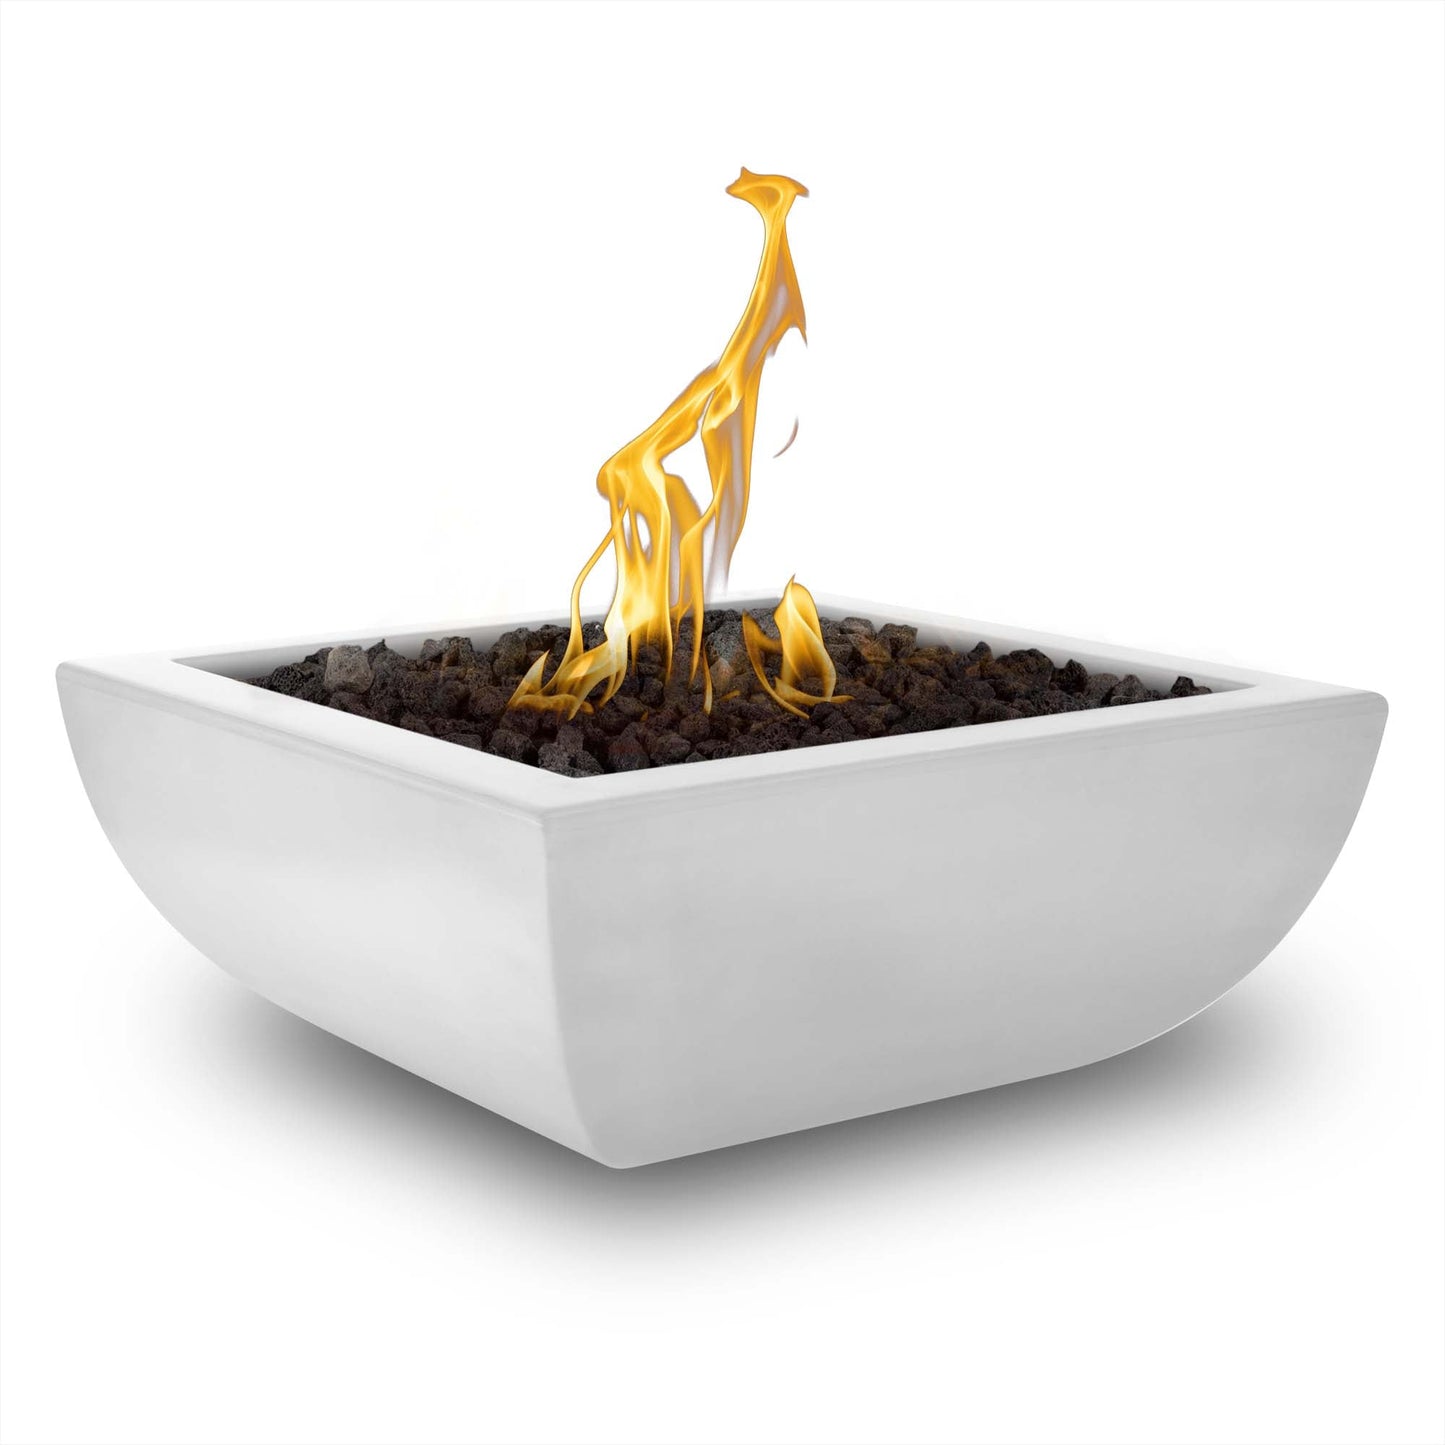 The Outdoor Plus Square Avalon 24" Brown GFRC Concrete Liquid Propane Fire Bowl with Match Lit with Flame Sense Ignition